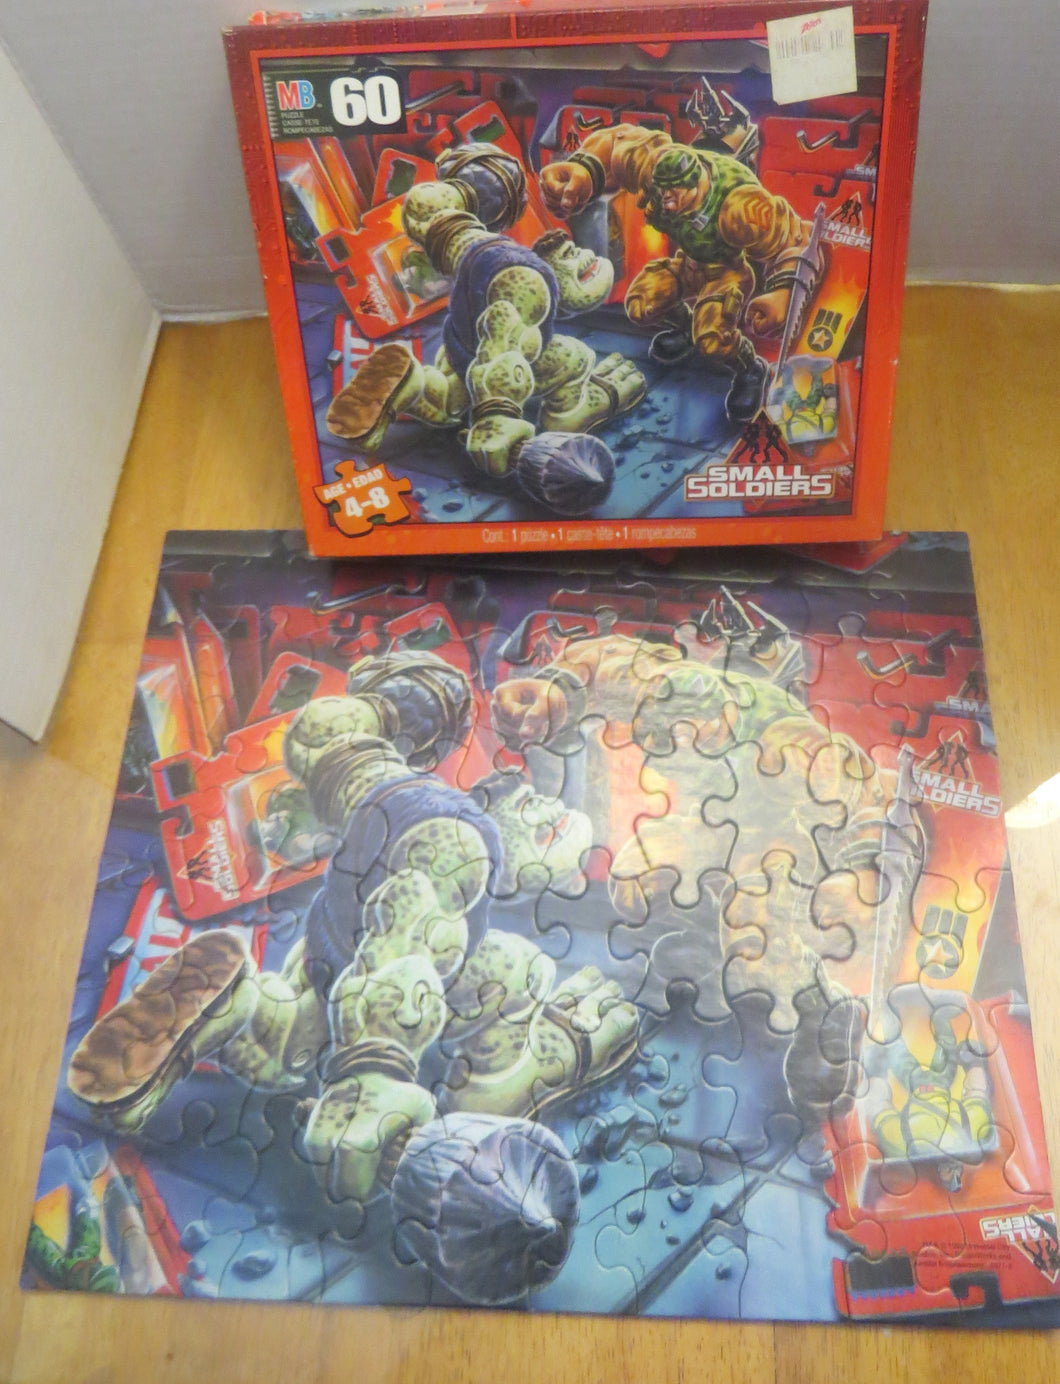 SMALL SOLDIERS - PUZZLE - 60 PCS